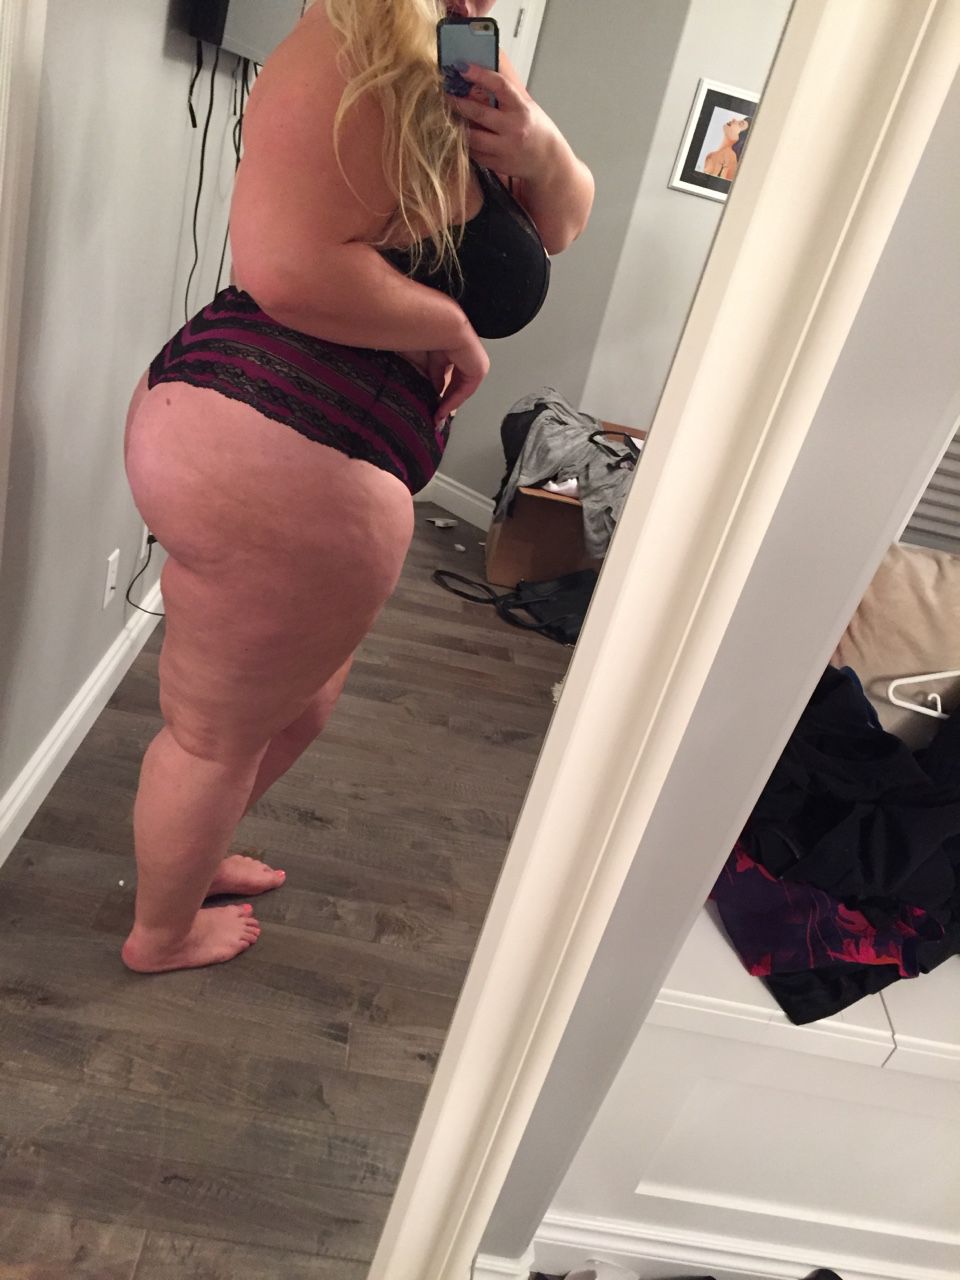 pawg2